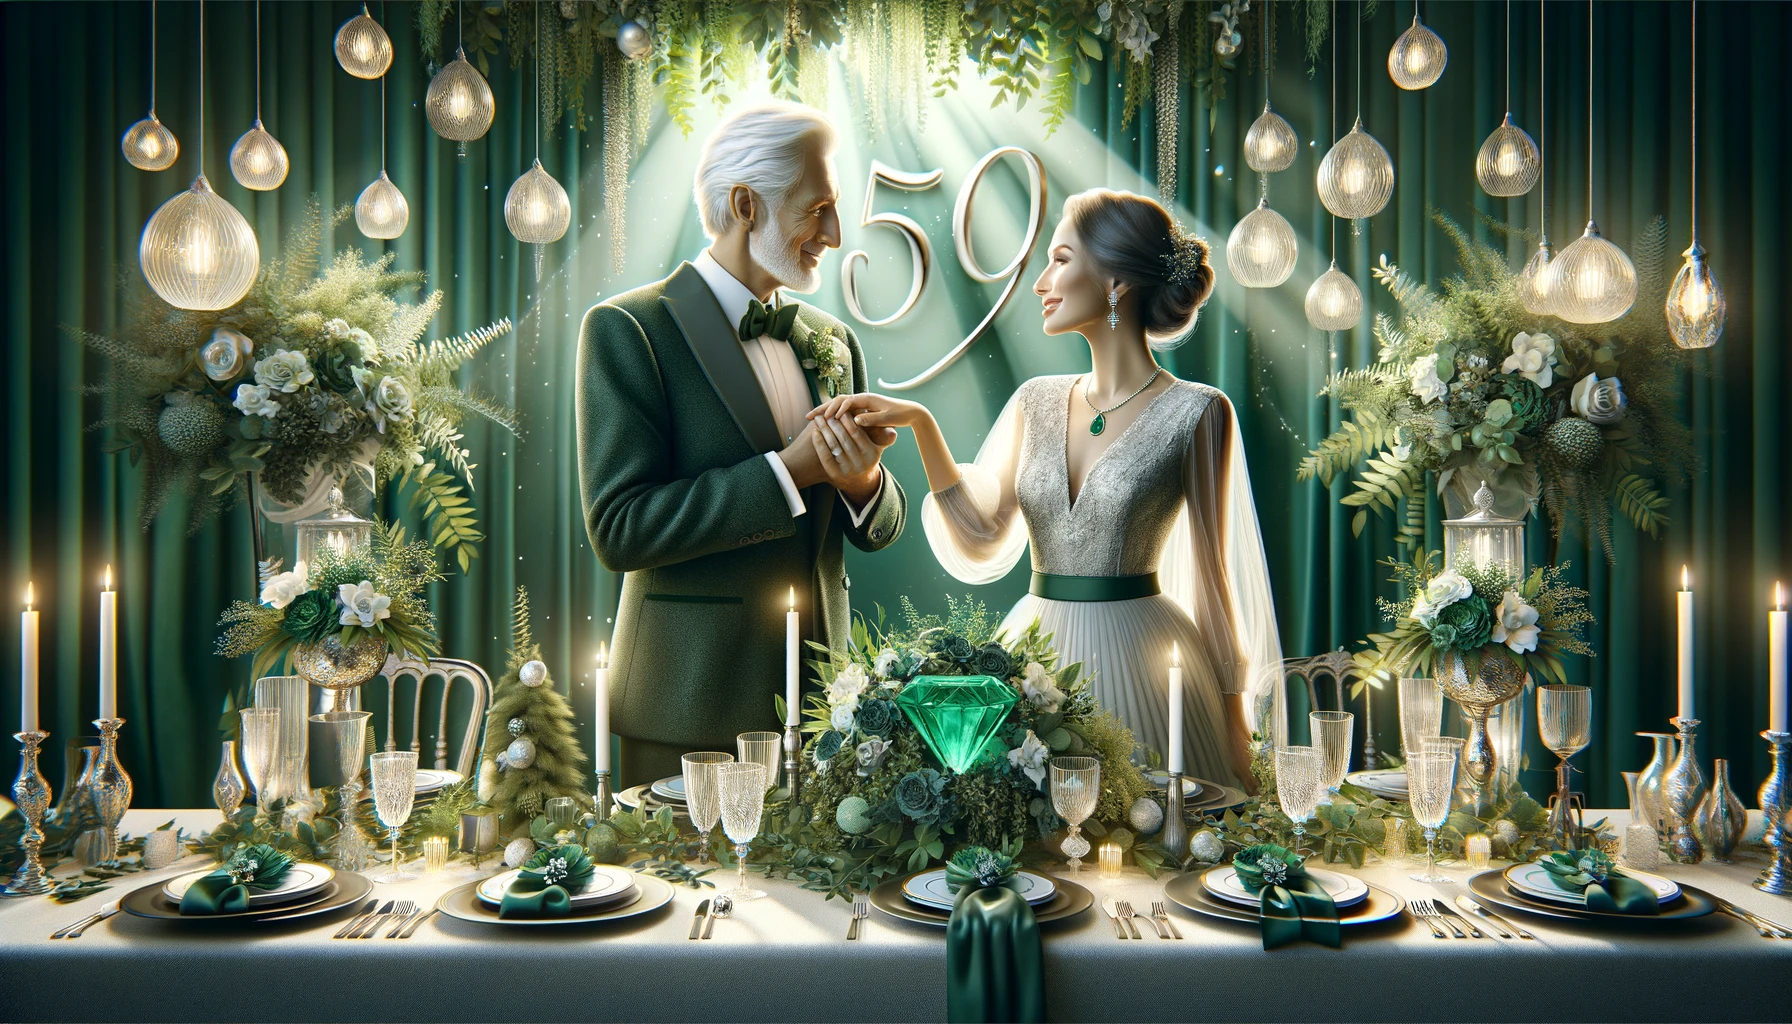 Celebration Ideas for the 59th Wedding Anniversary